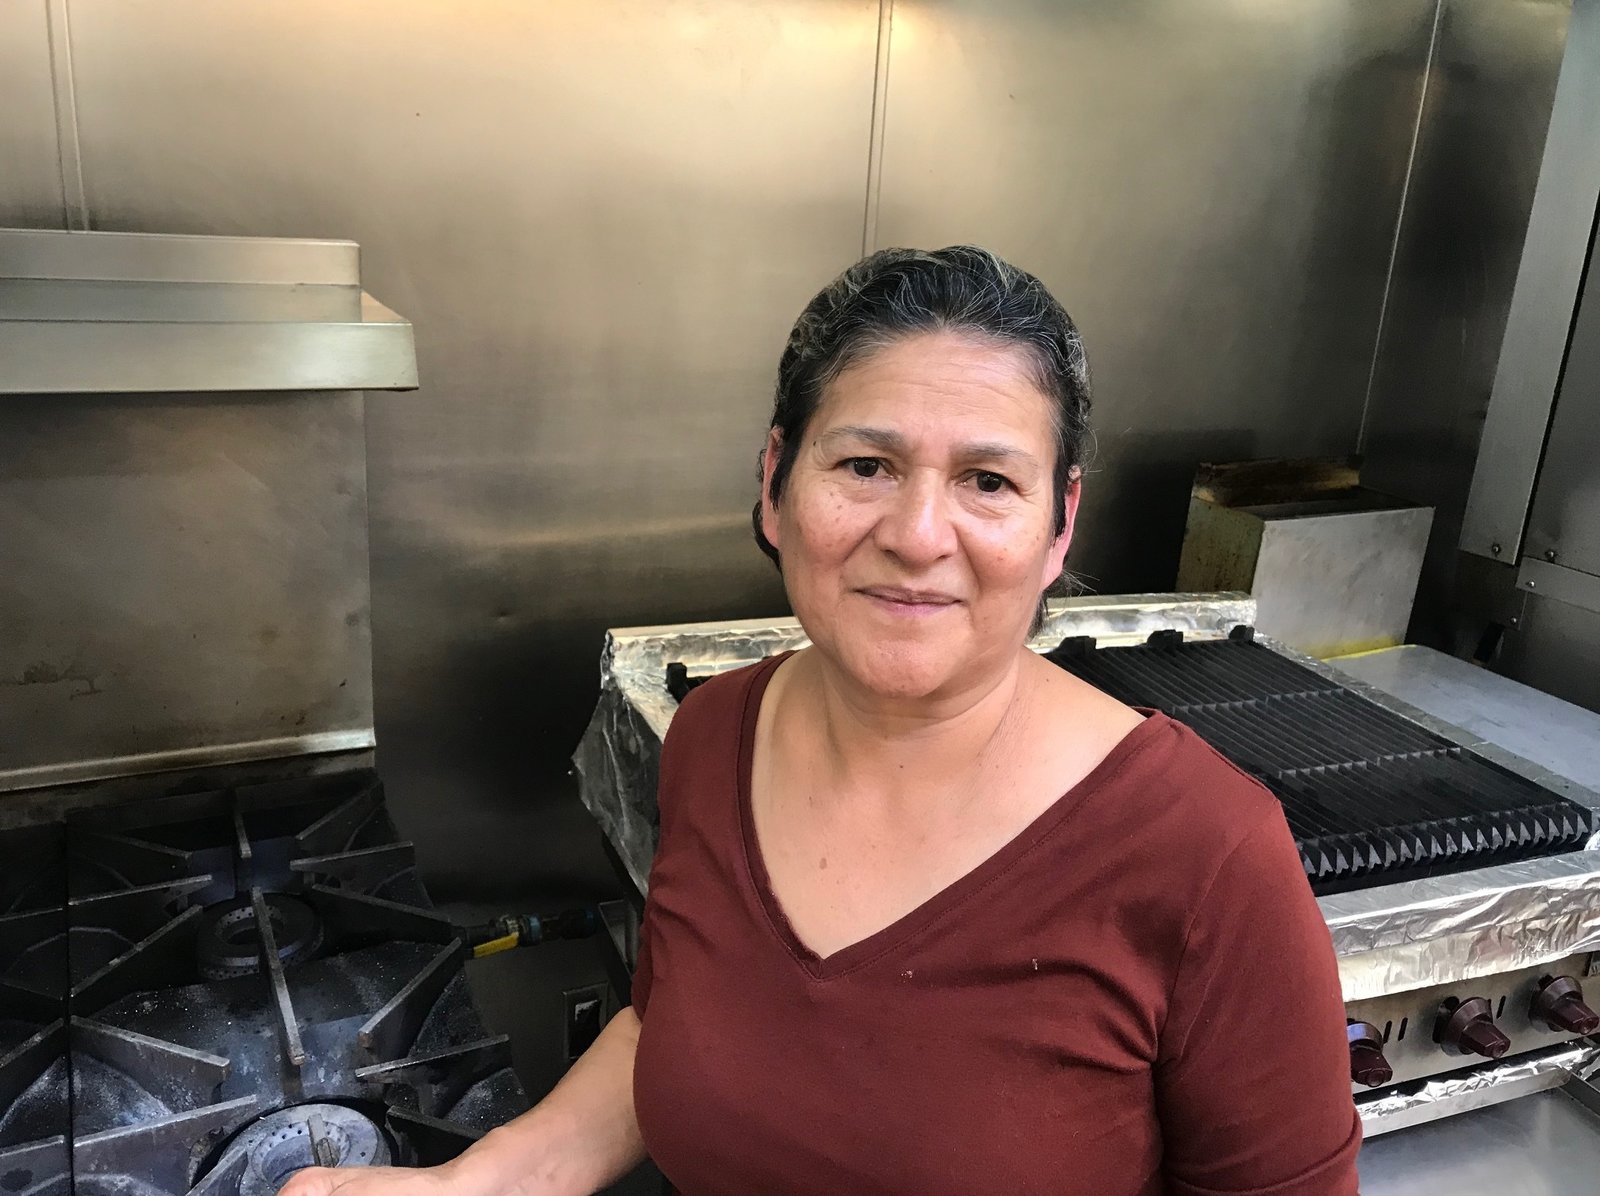 Rosa Martinez remembers a harrowing journey crossing the U.S.-Mexico border. Now she cooks delicacies from her native Oaxaca at La Cocina.